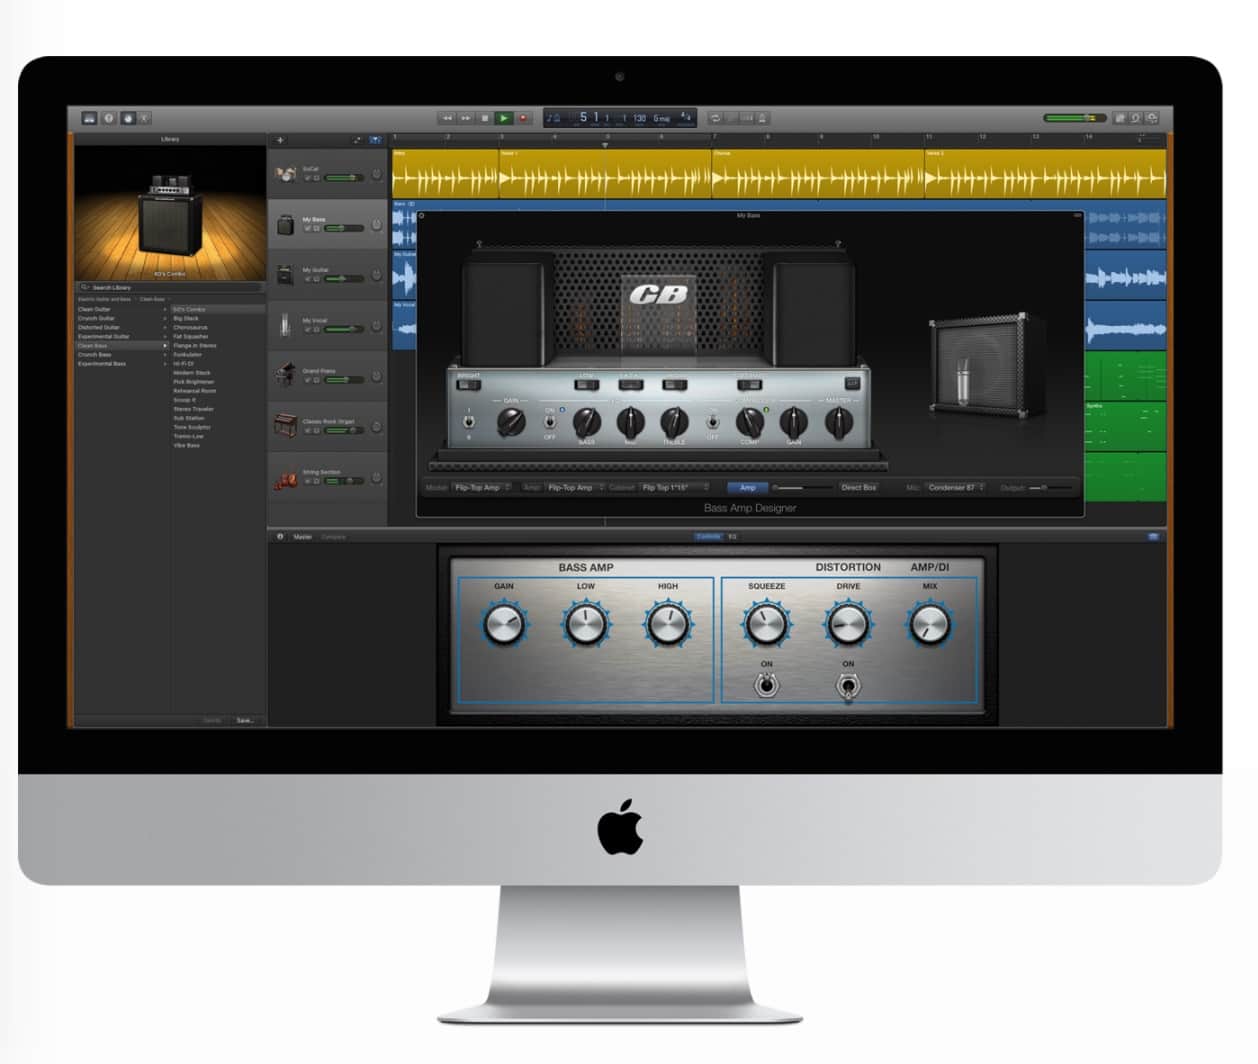 You no longer need to buy a new Mac to get GarageBand for free.